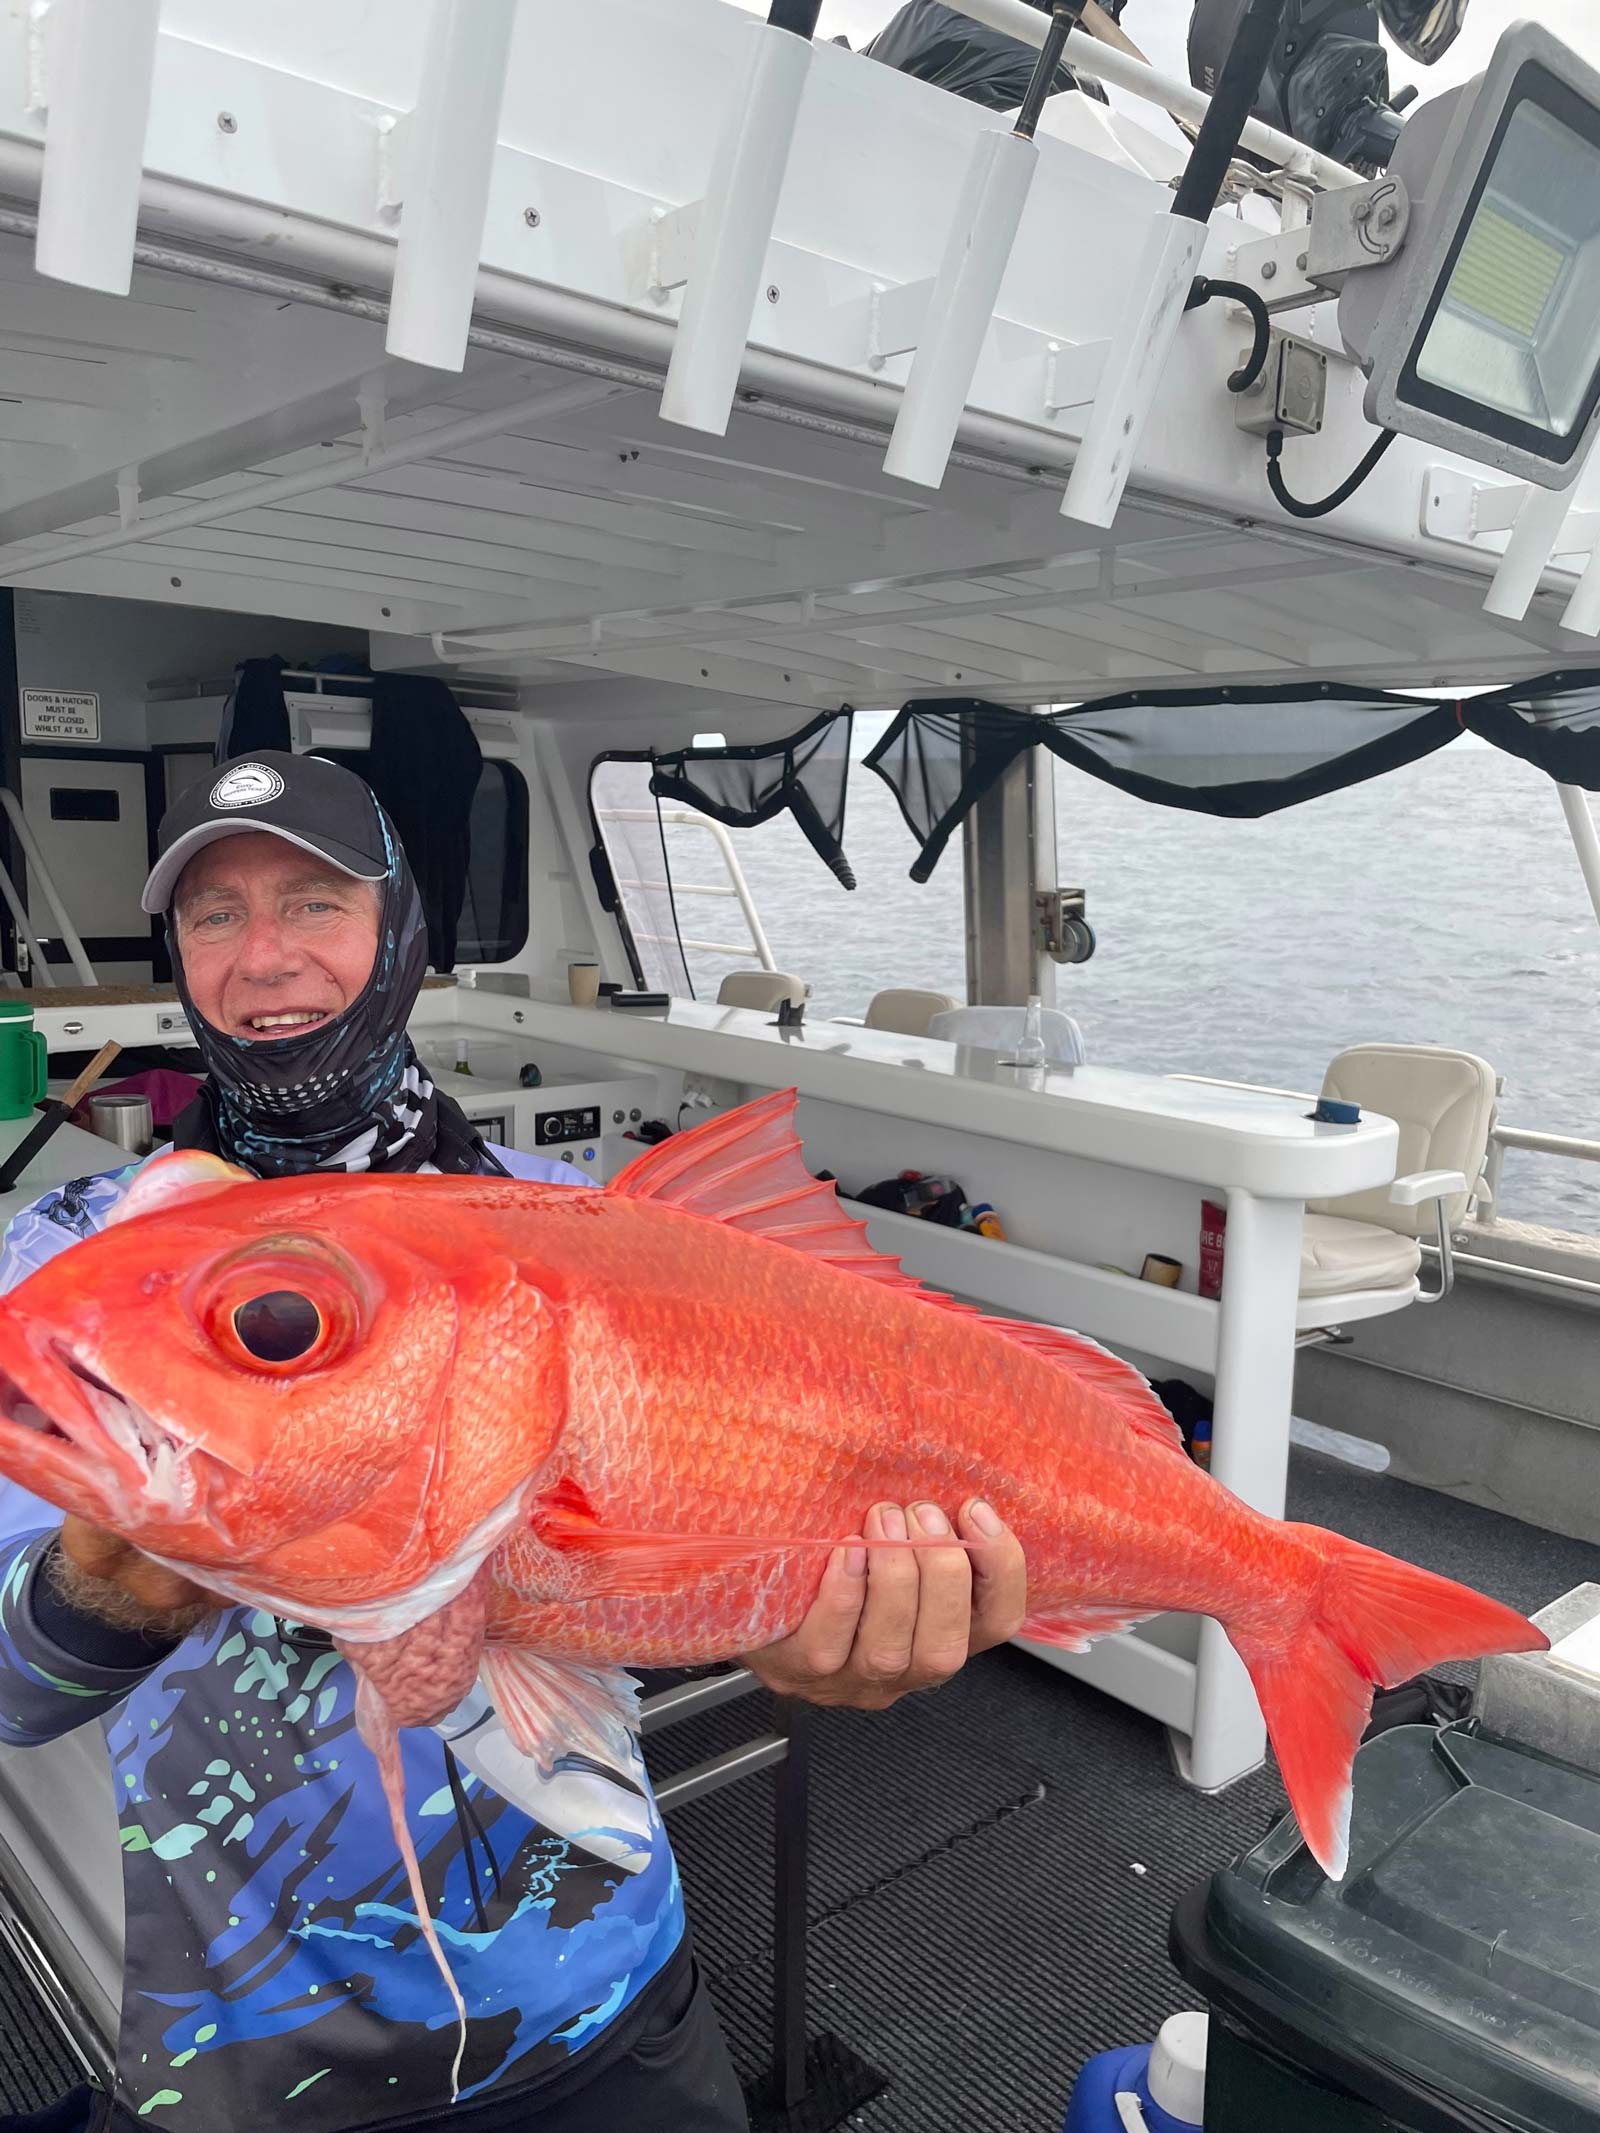 Brian Edwards holding his ruby snapper caught off the coast of Australia